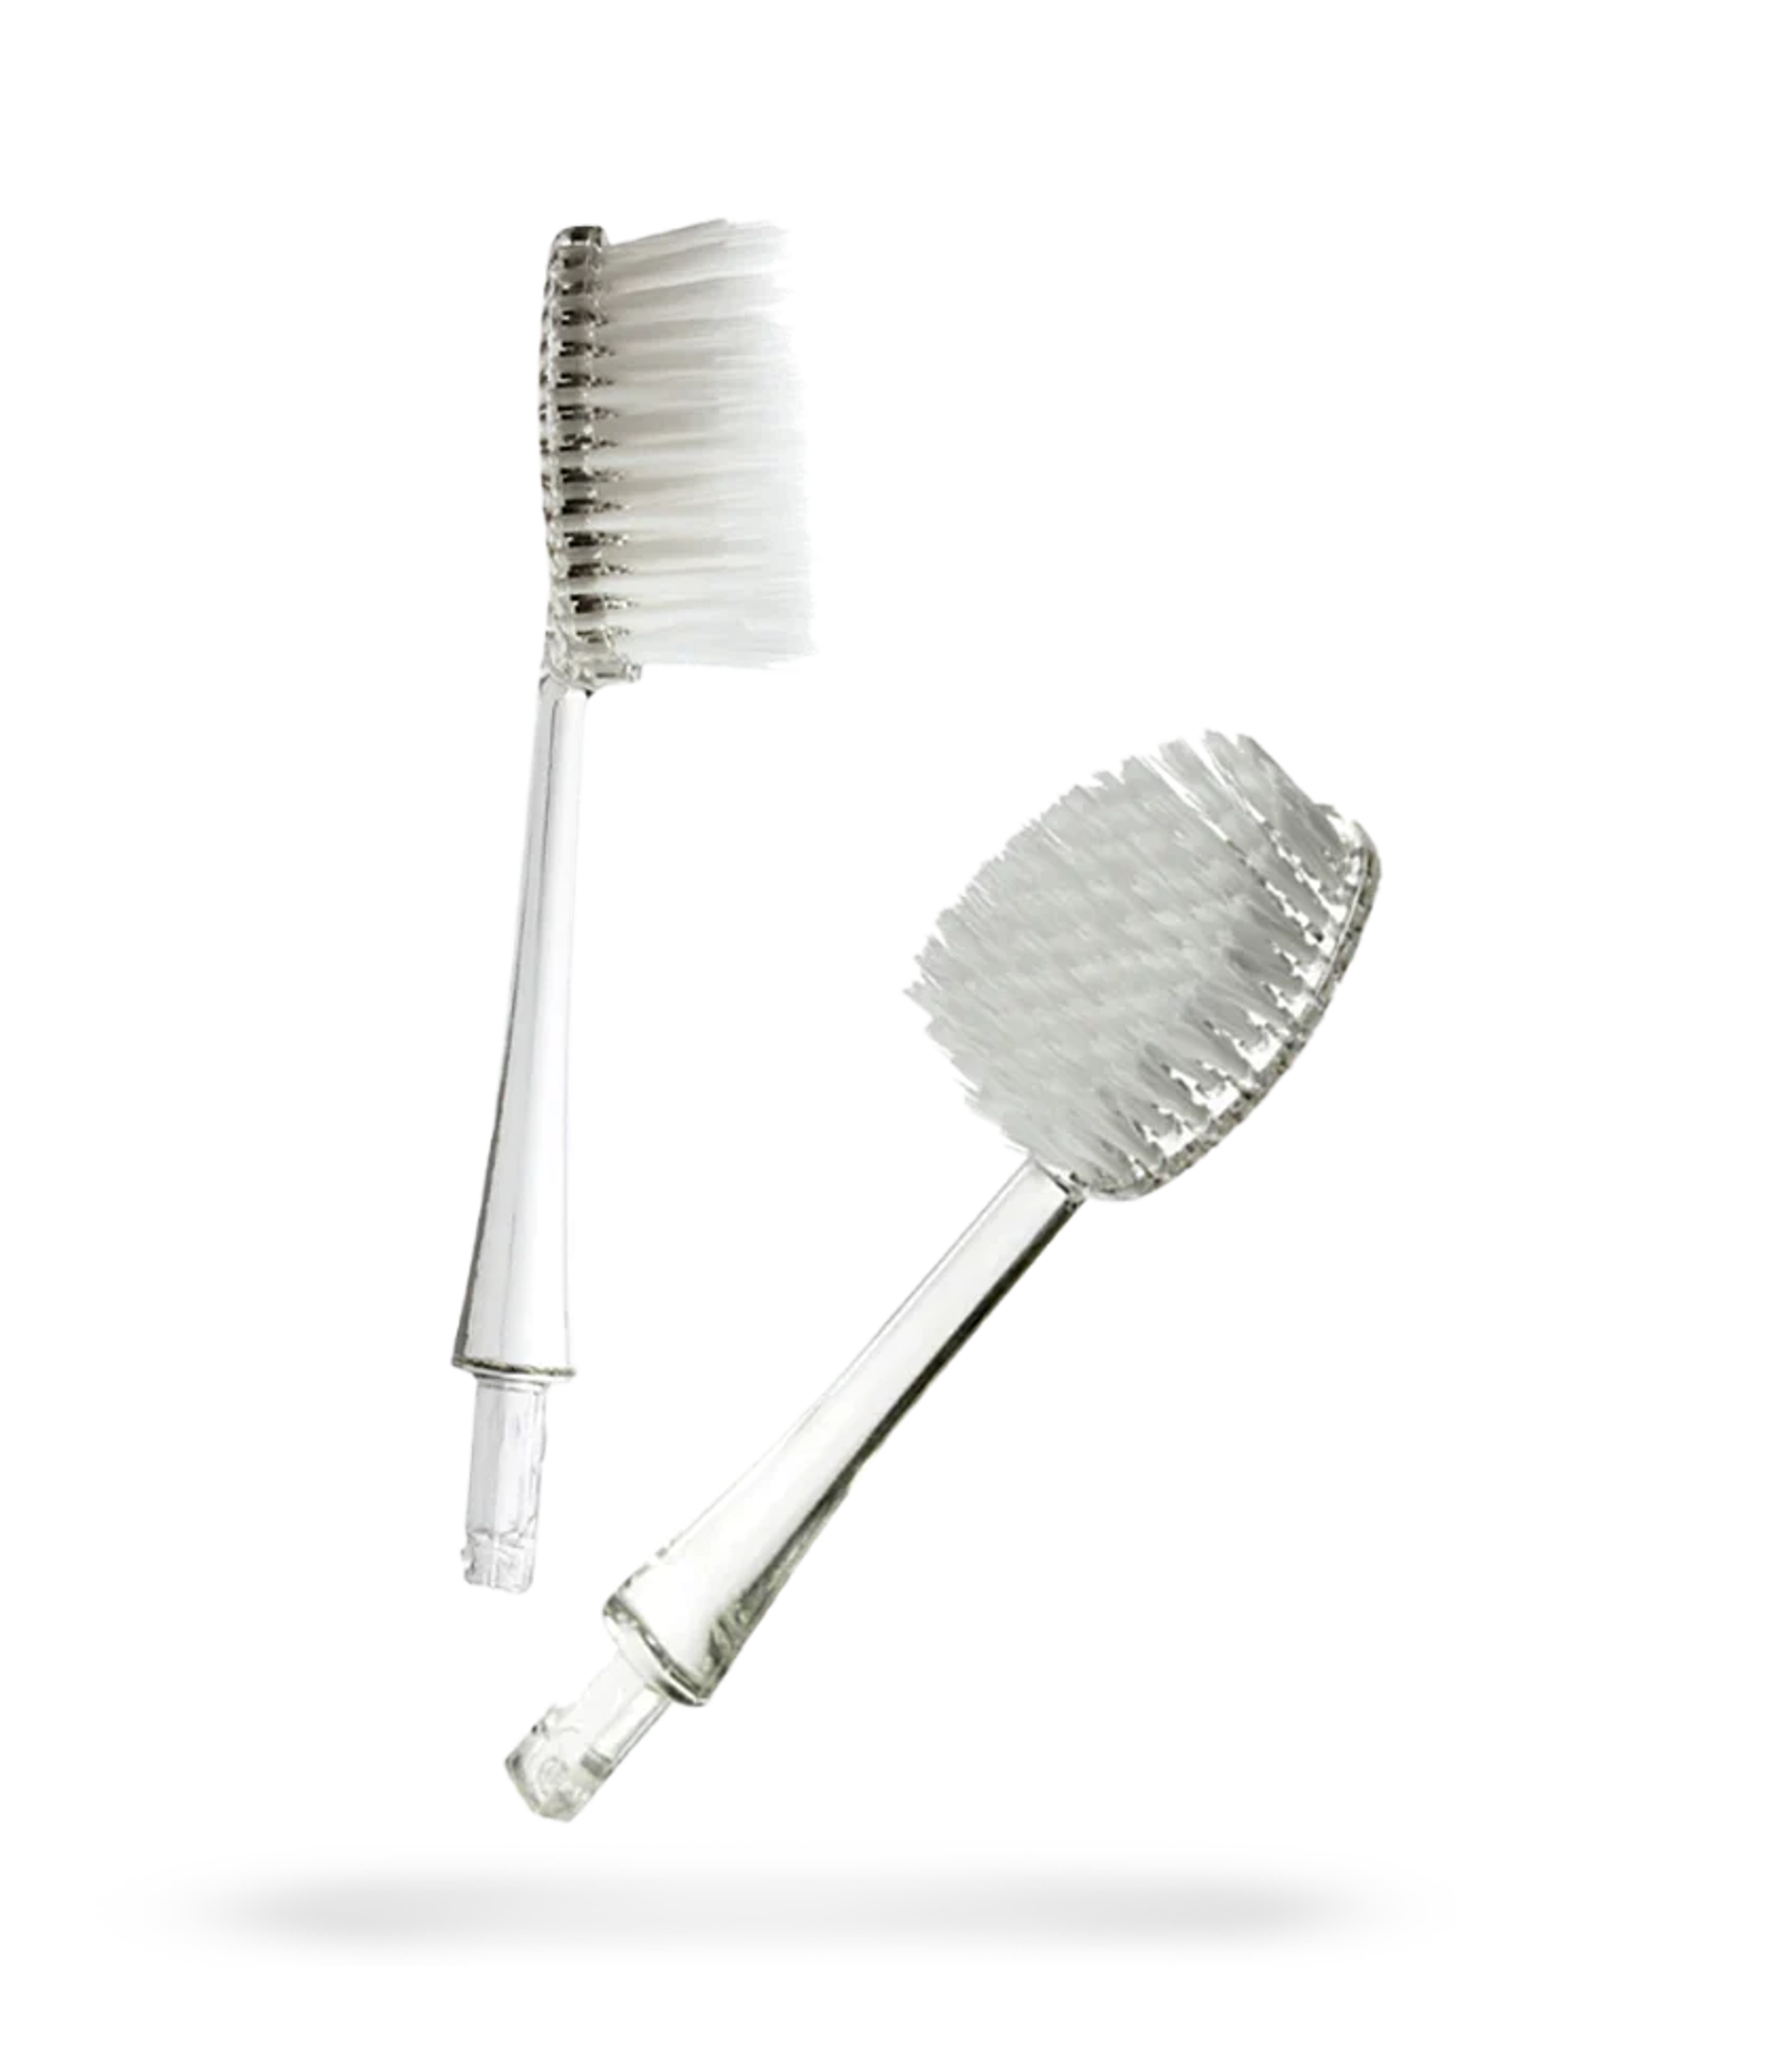 Brush Replacement Heads (2 Pack - Source & TOUR) - Super Soft Flossing